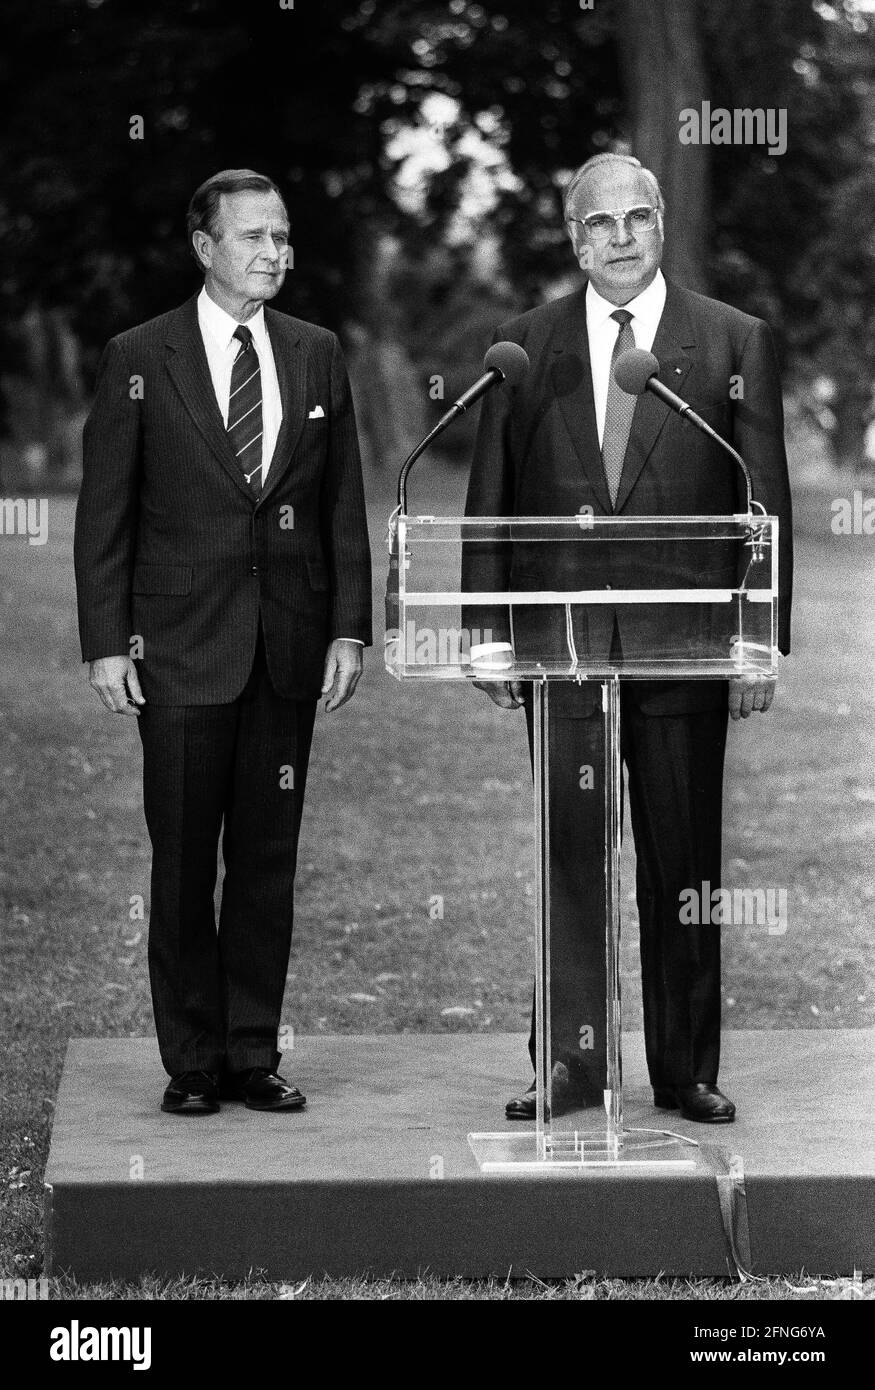 Germany, Bonn, 30.05.1989 Archive No.: 06-62-16 Visit of the American President Photo: Federal Chancellor Helmut Kohl and George H. W. Bush [automated translation] Stock Photo